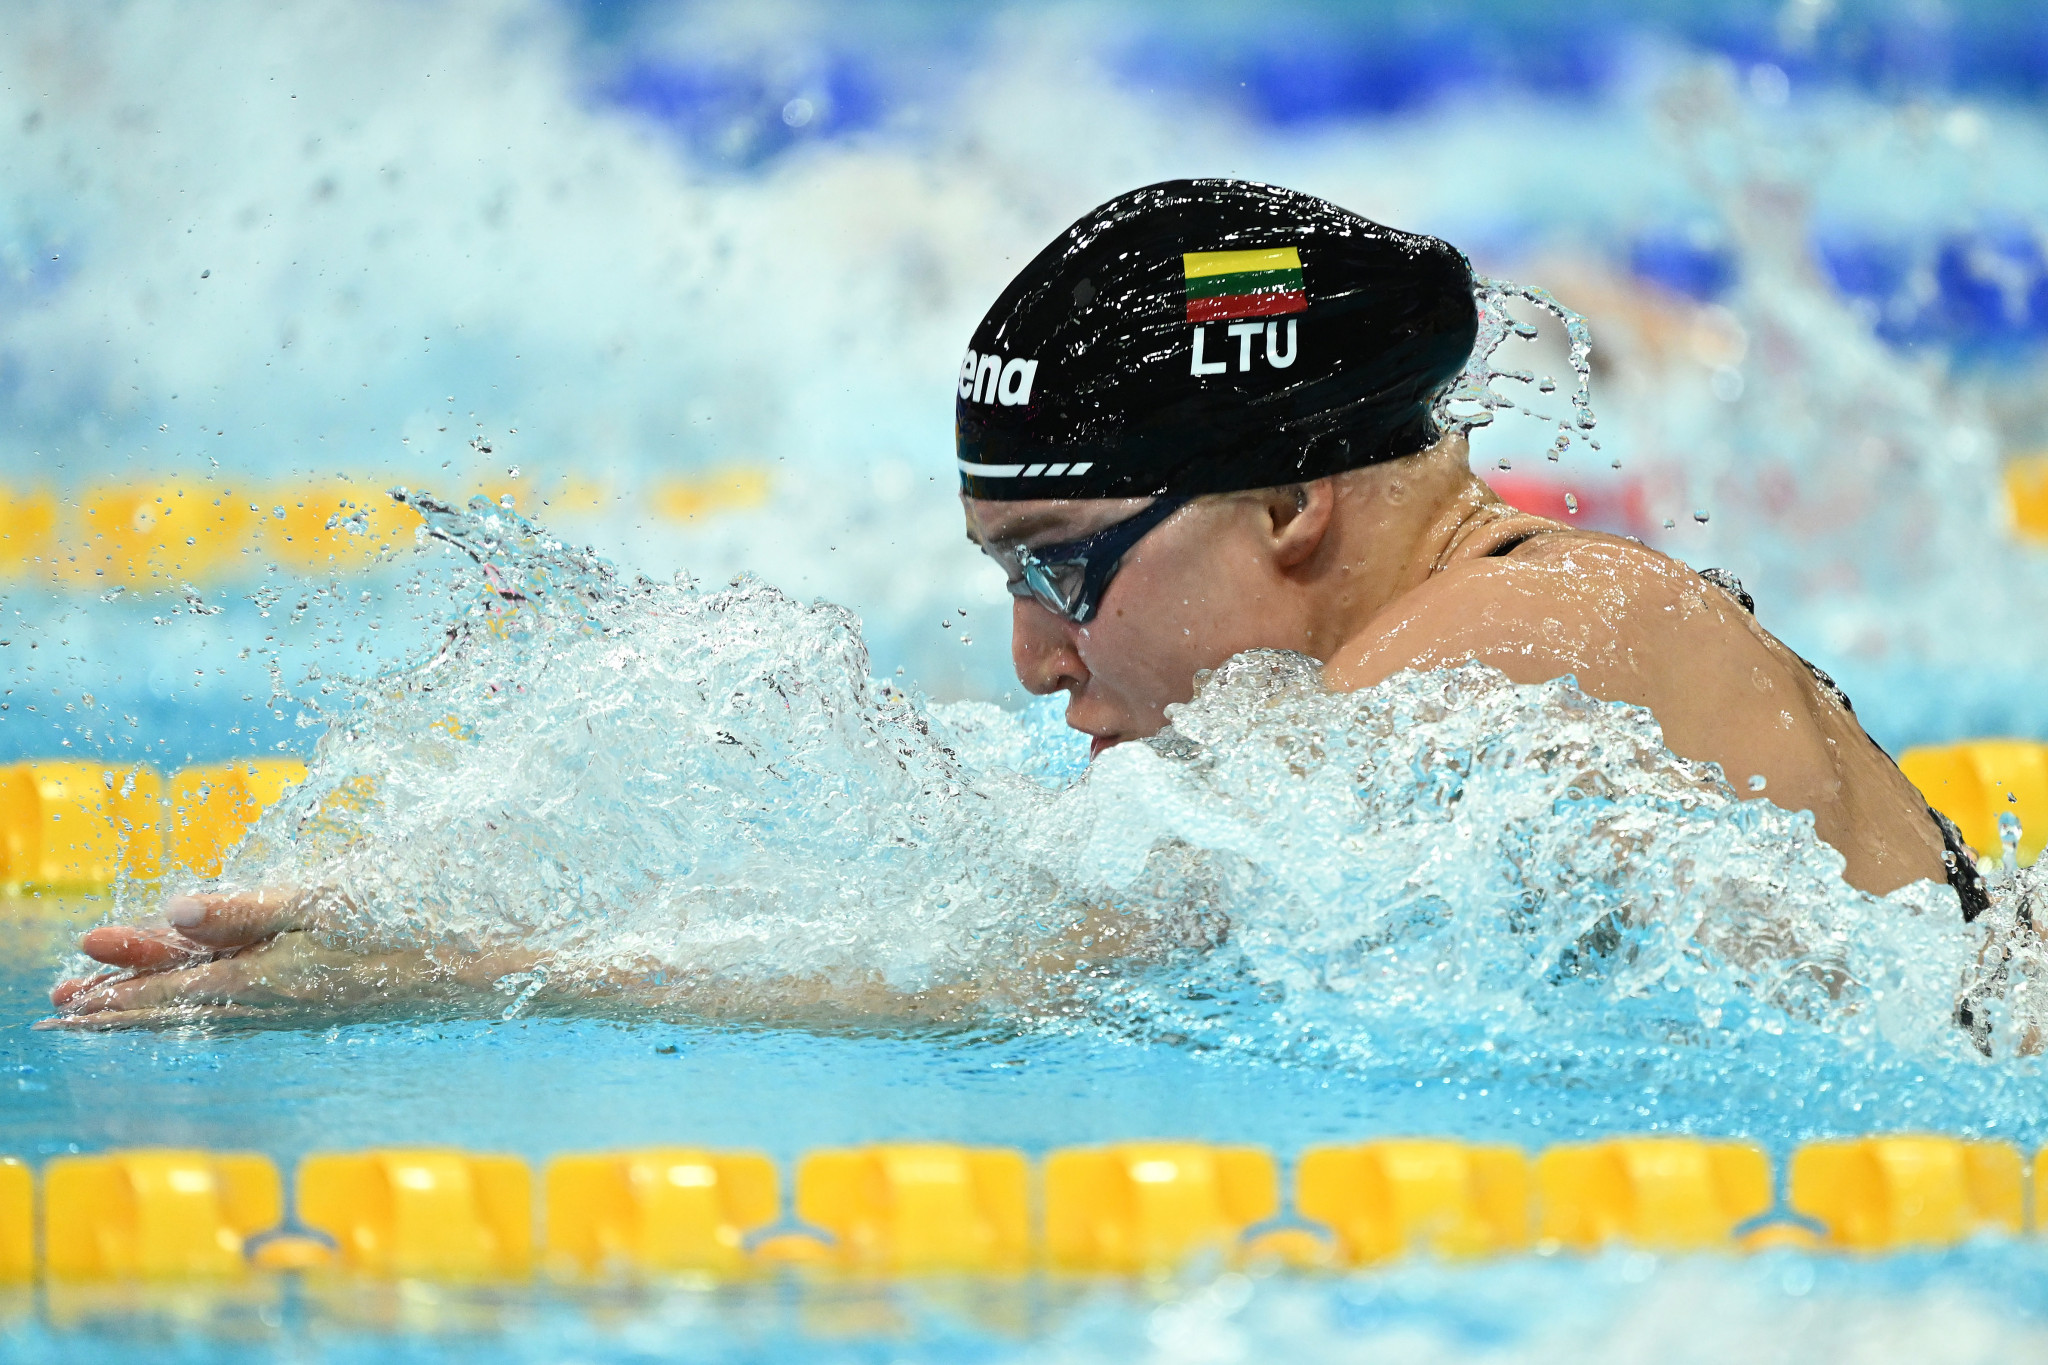 Rūta Meilutytė of Lithuania claimed her first gold medal at a FINA World Championships since 2013 in the women's 50m breaststroke ©Getty Images